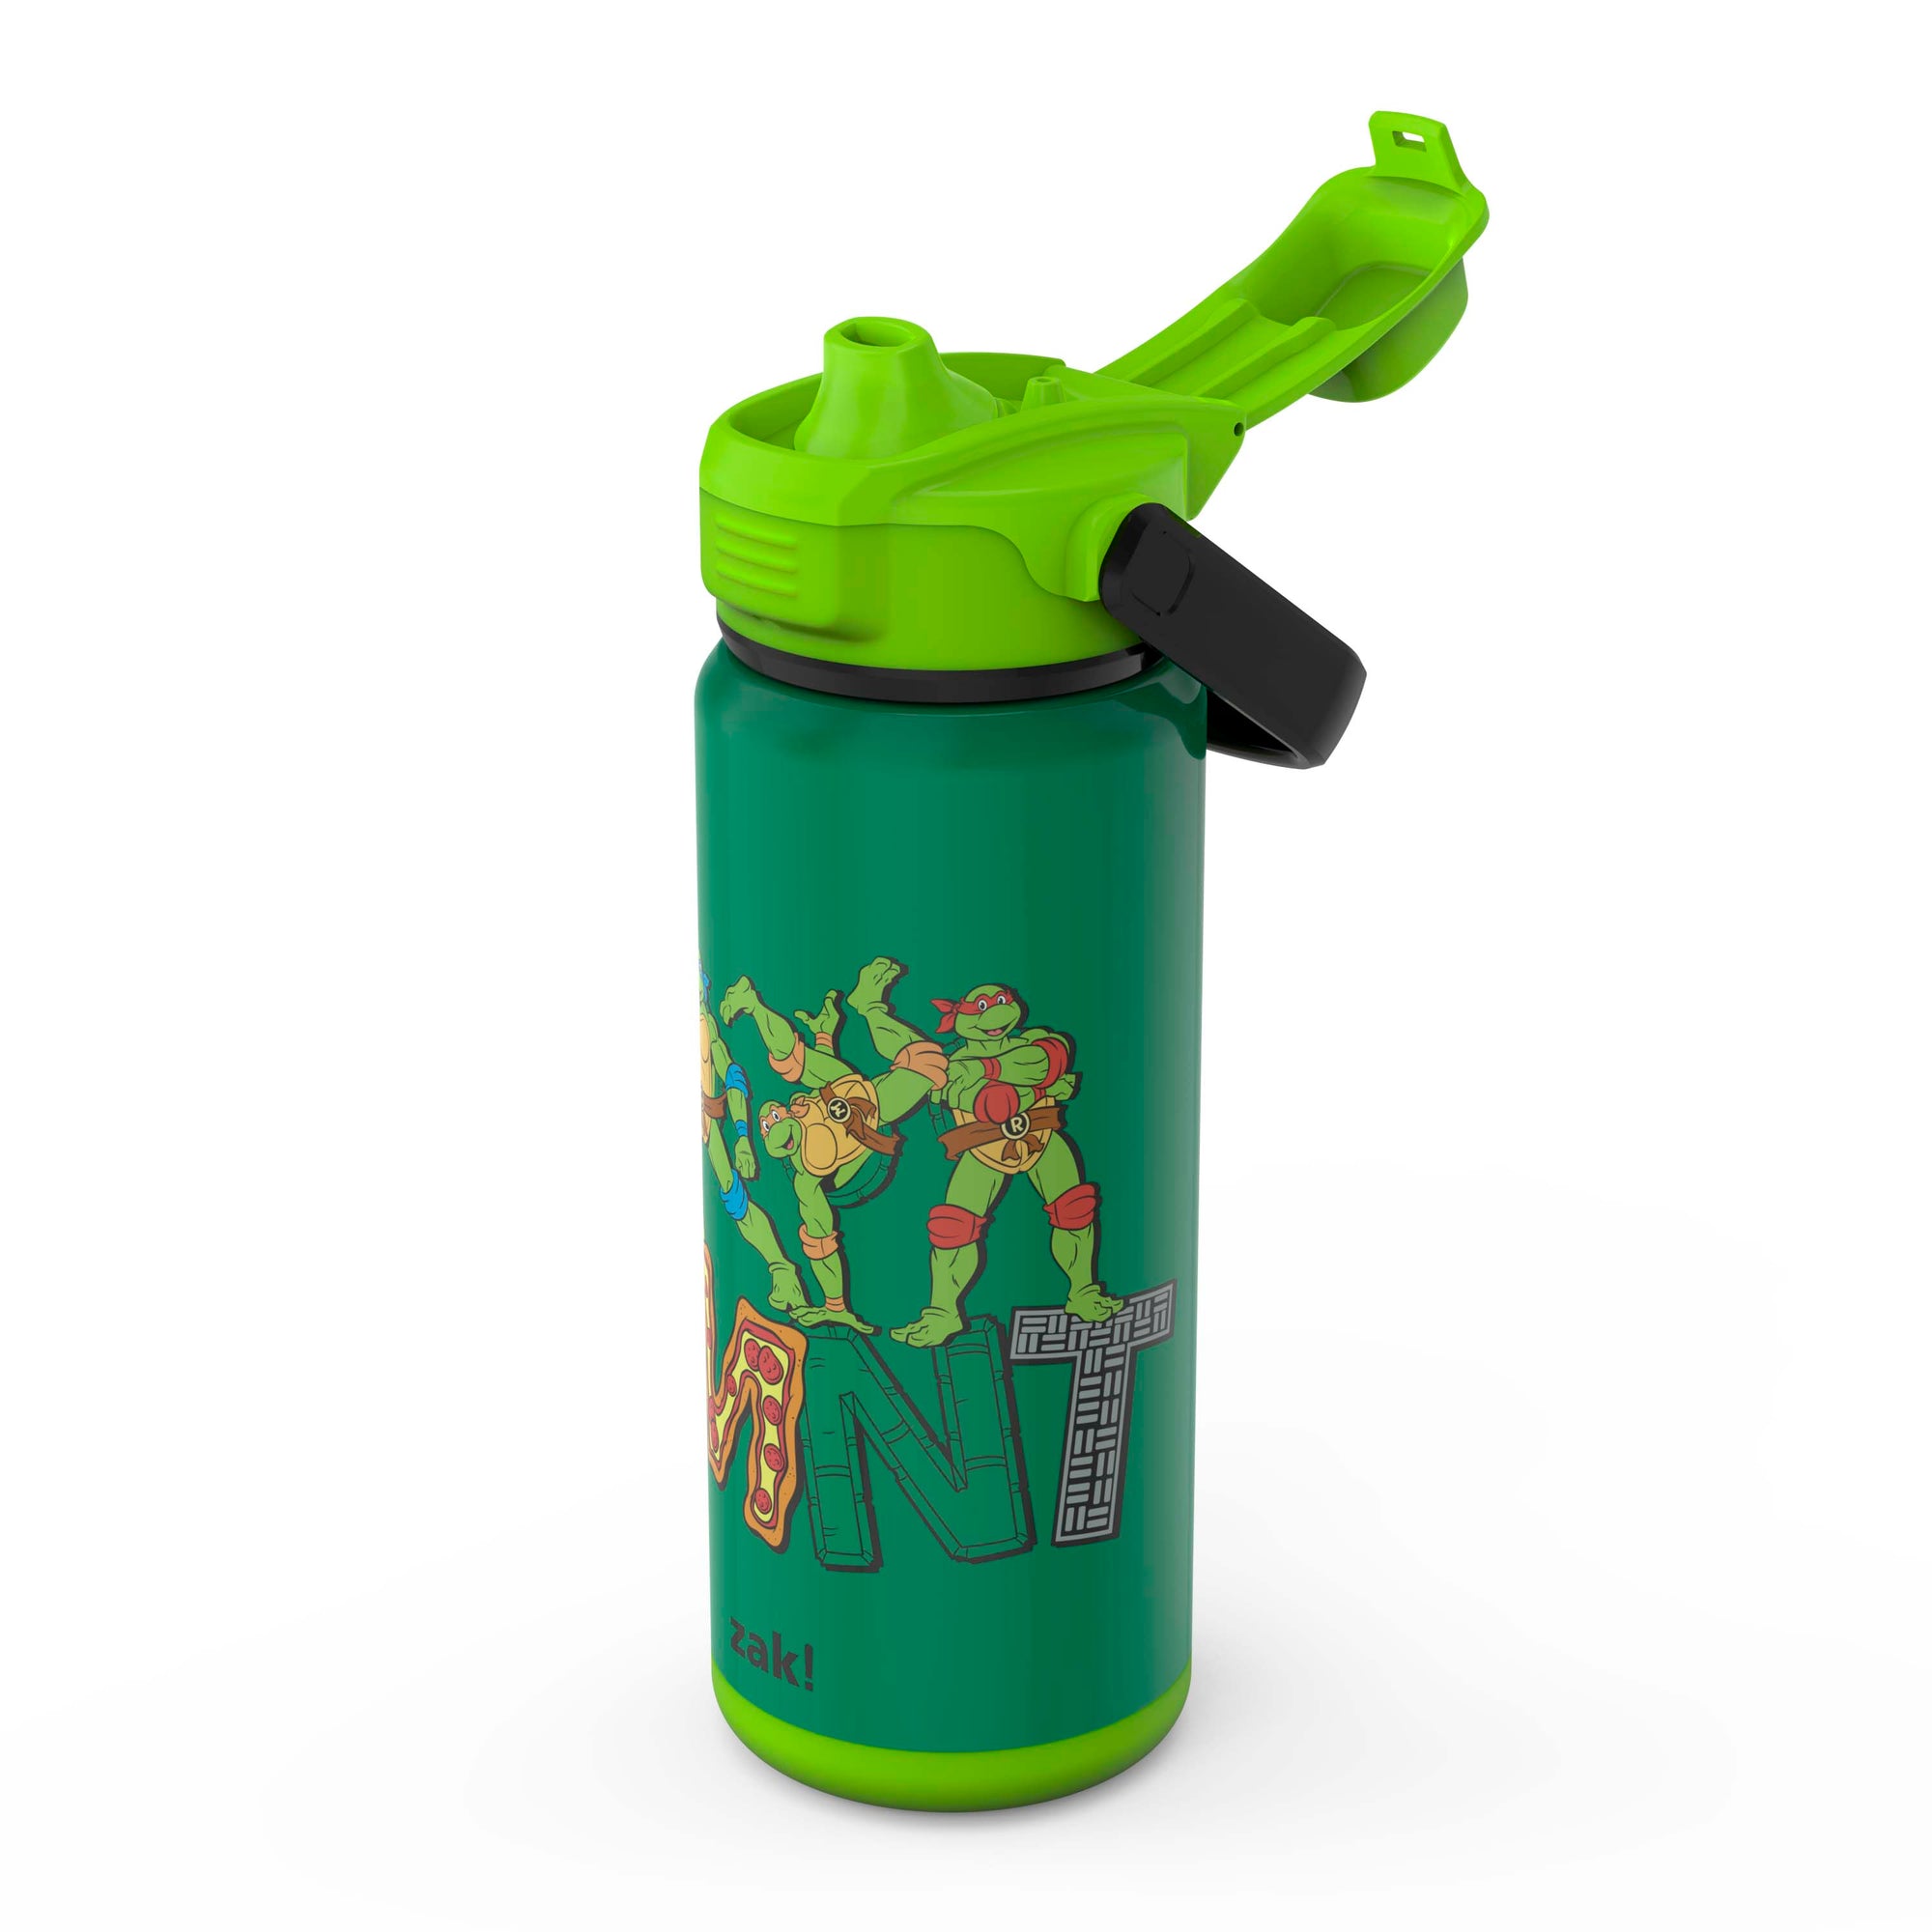 Teenage Mutant Ninja Turtles Beacon Stainless Steel Insulated Kids Water Bottle with Covered Spout, 20 Ounces